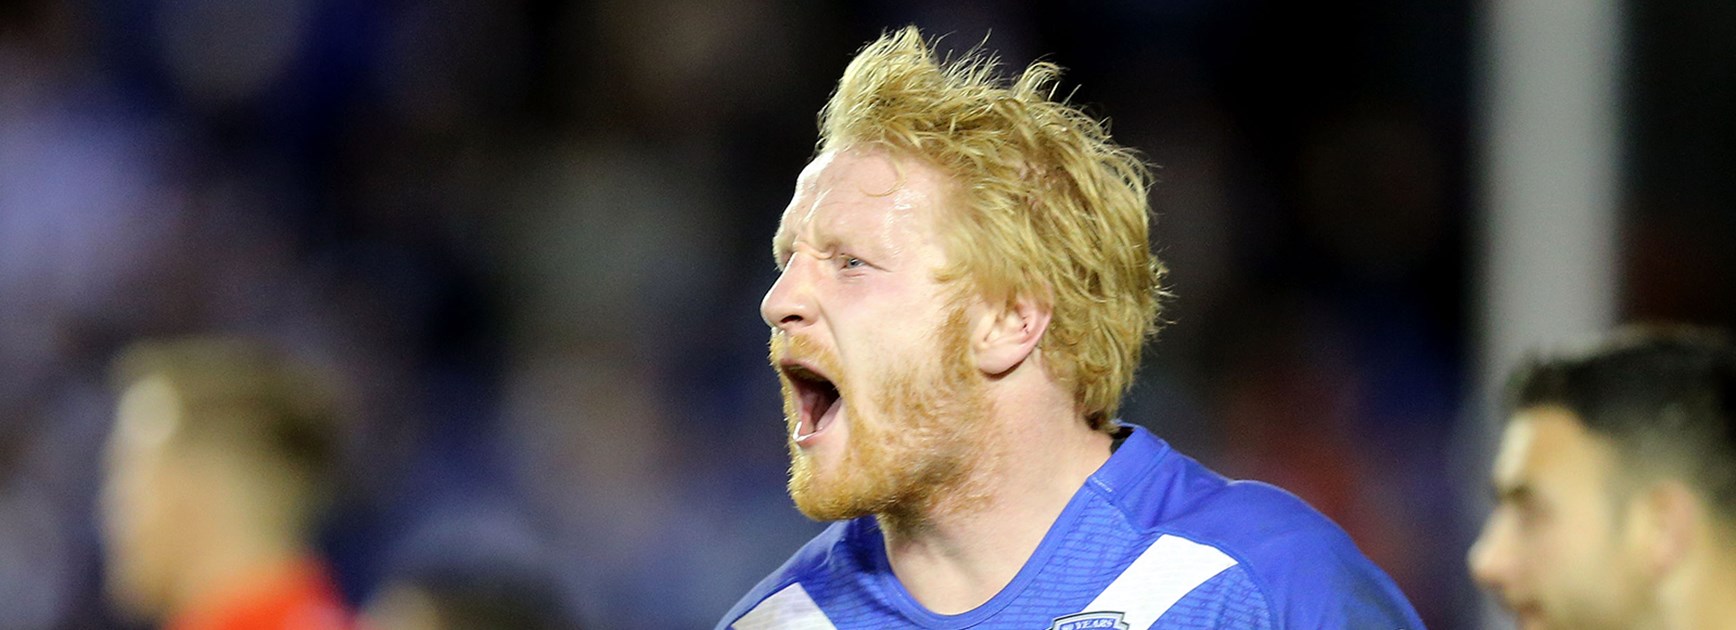 Bulldogs captain James Graham says his side was complacent against Cronulla in Round 20.